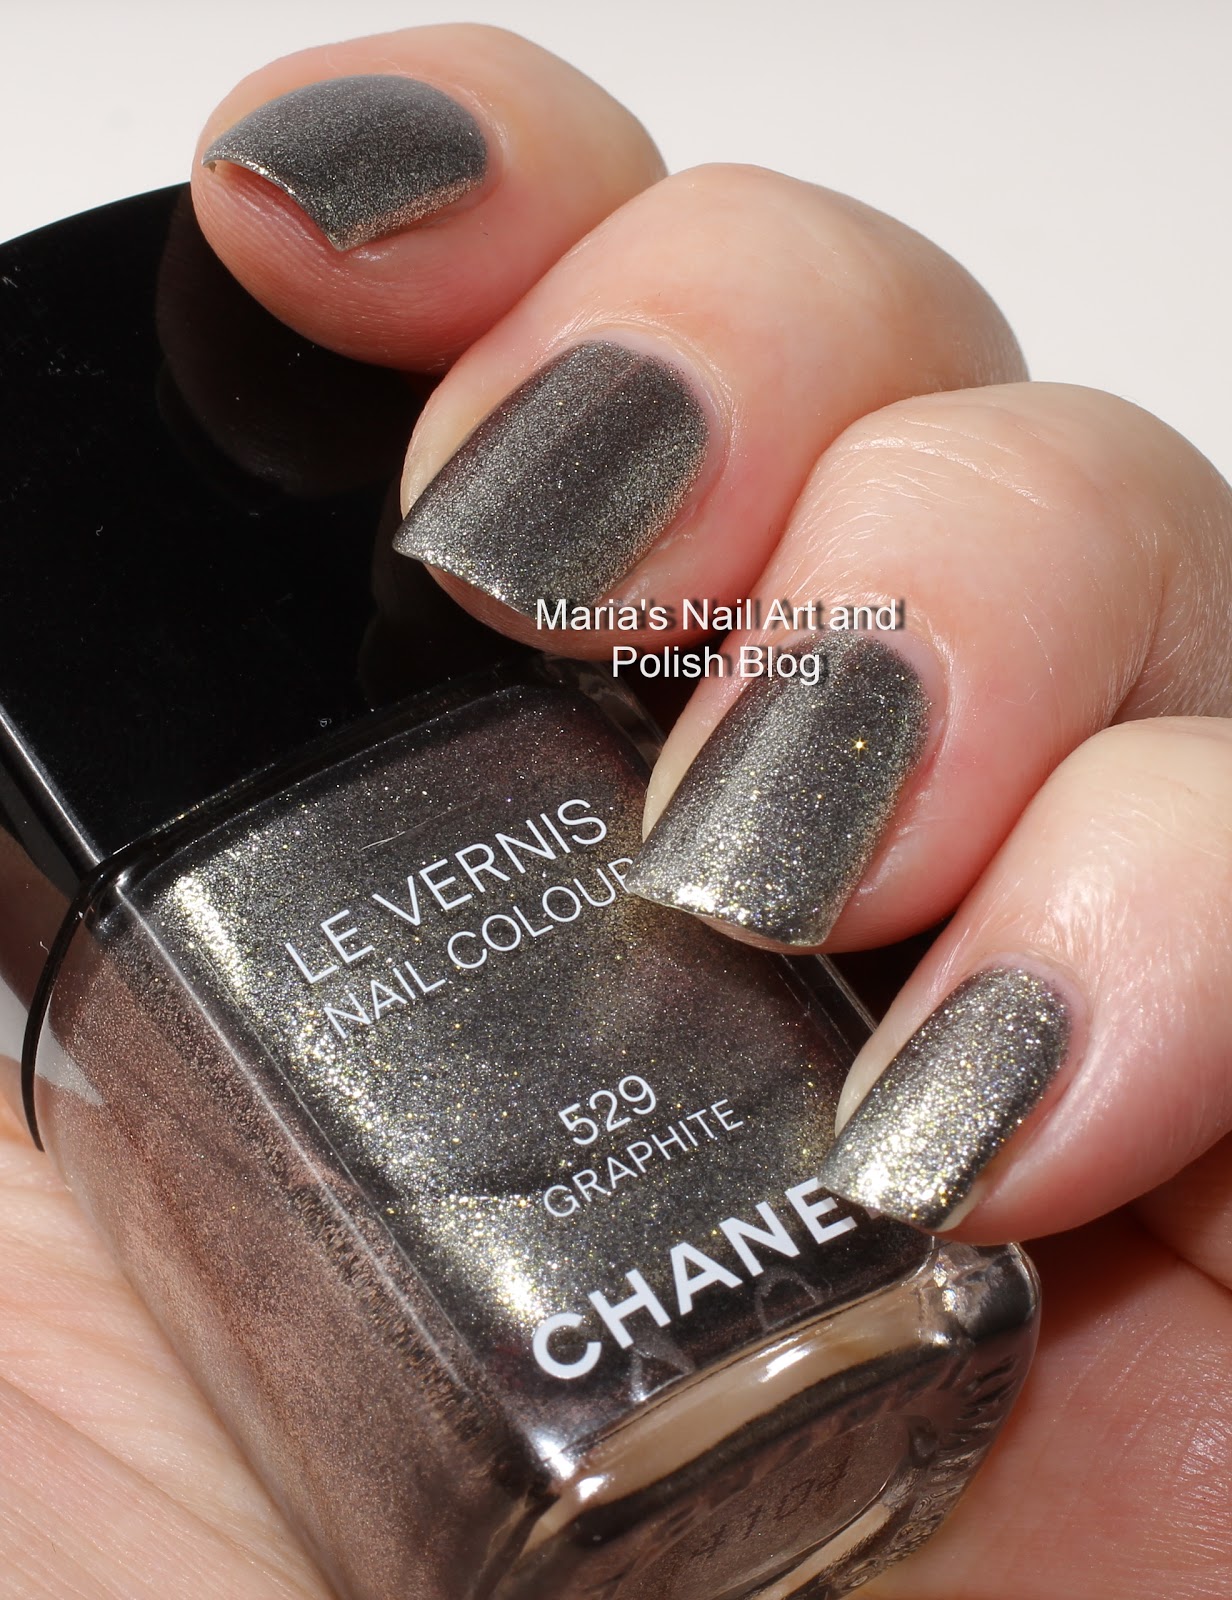 Marias Nail and Polish Blog: Chanel Graphite 529, Illusions d'Ombre coll. swatches